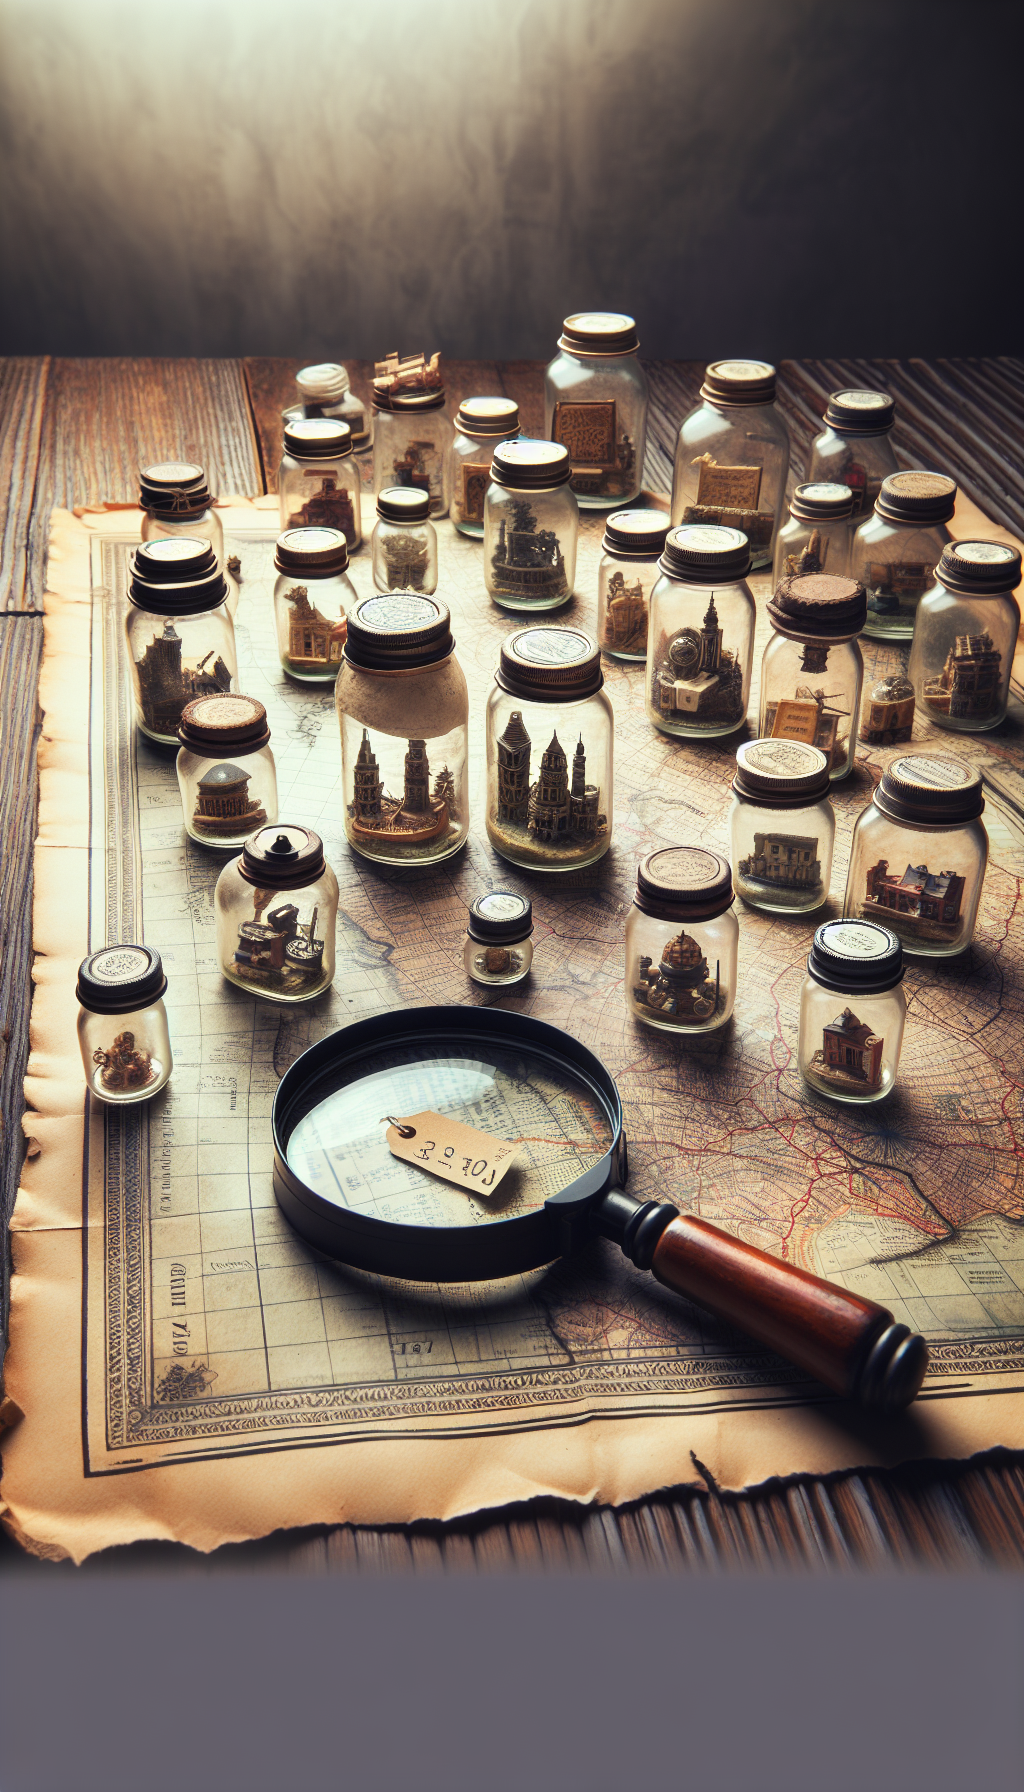 An illustration depicts an antique map unfurling across a rustic wooden table, dotted with aged mason jars of varying sizes and patinas. Each jar contains a miniature, diorama-like scene representing different eras in history, symbolizing the jars' journey through time. A magnifying glass peers into one, highlighting a price tag that hints at its increasing value within the collector's world.